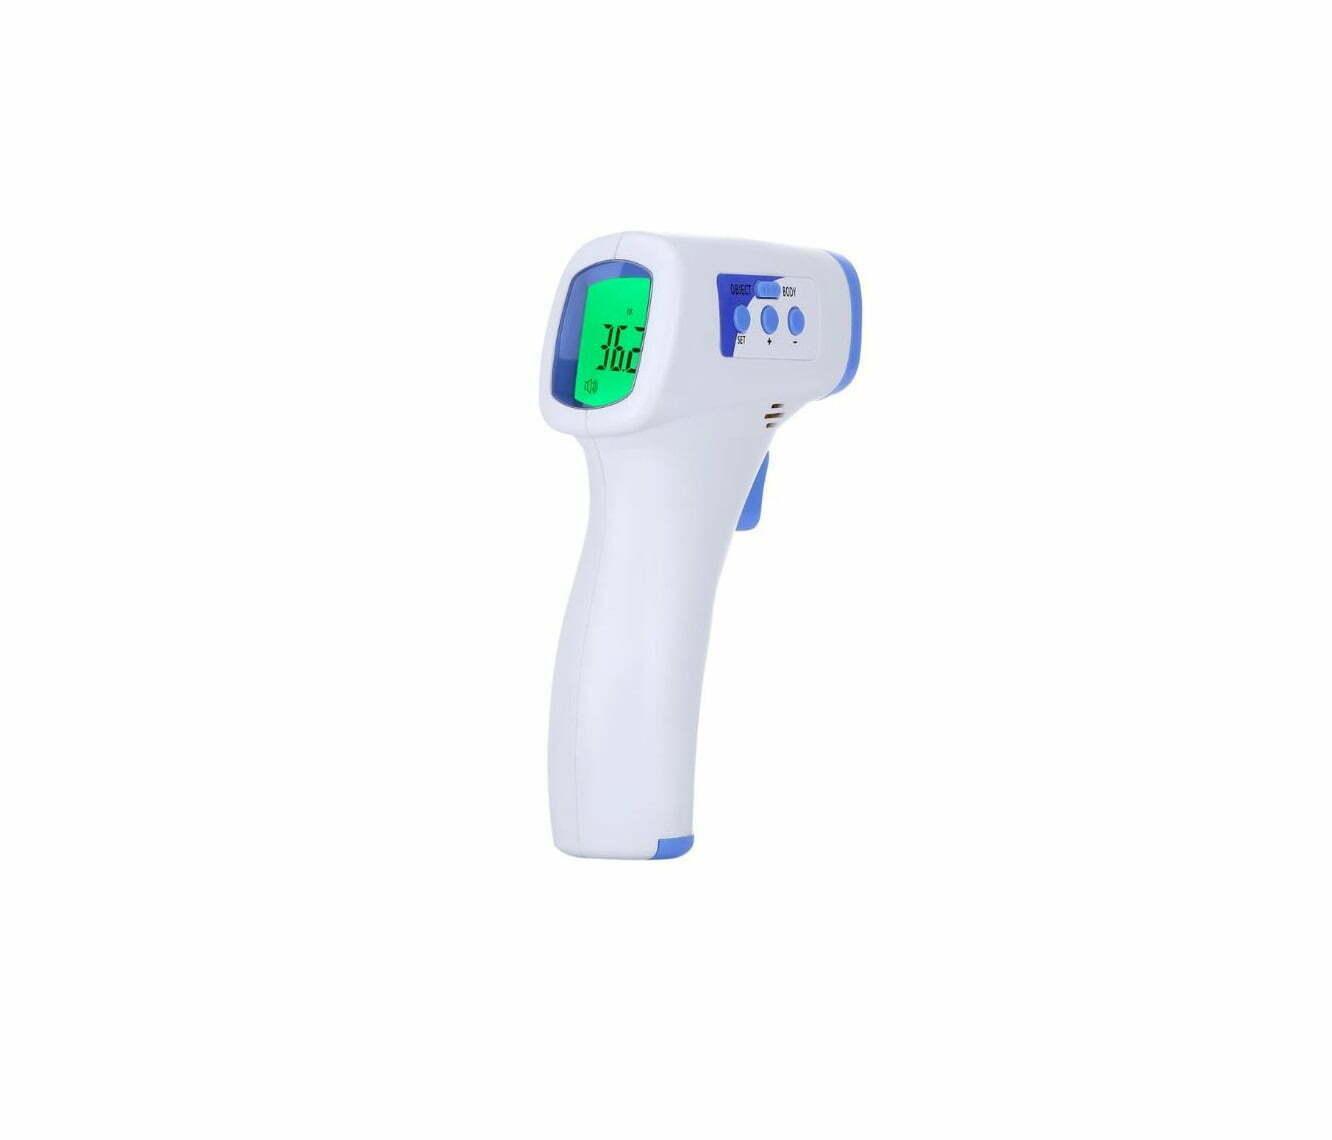 GLEN LZX-F16682 Infrared Thermometer User Guide - Featured image